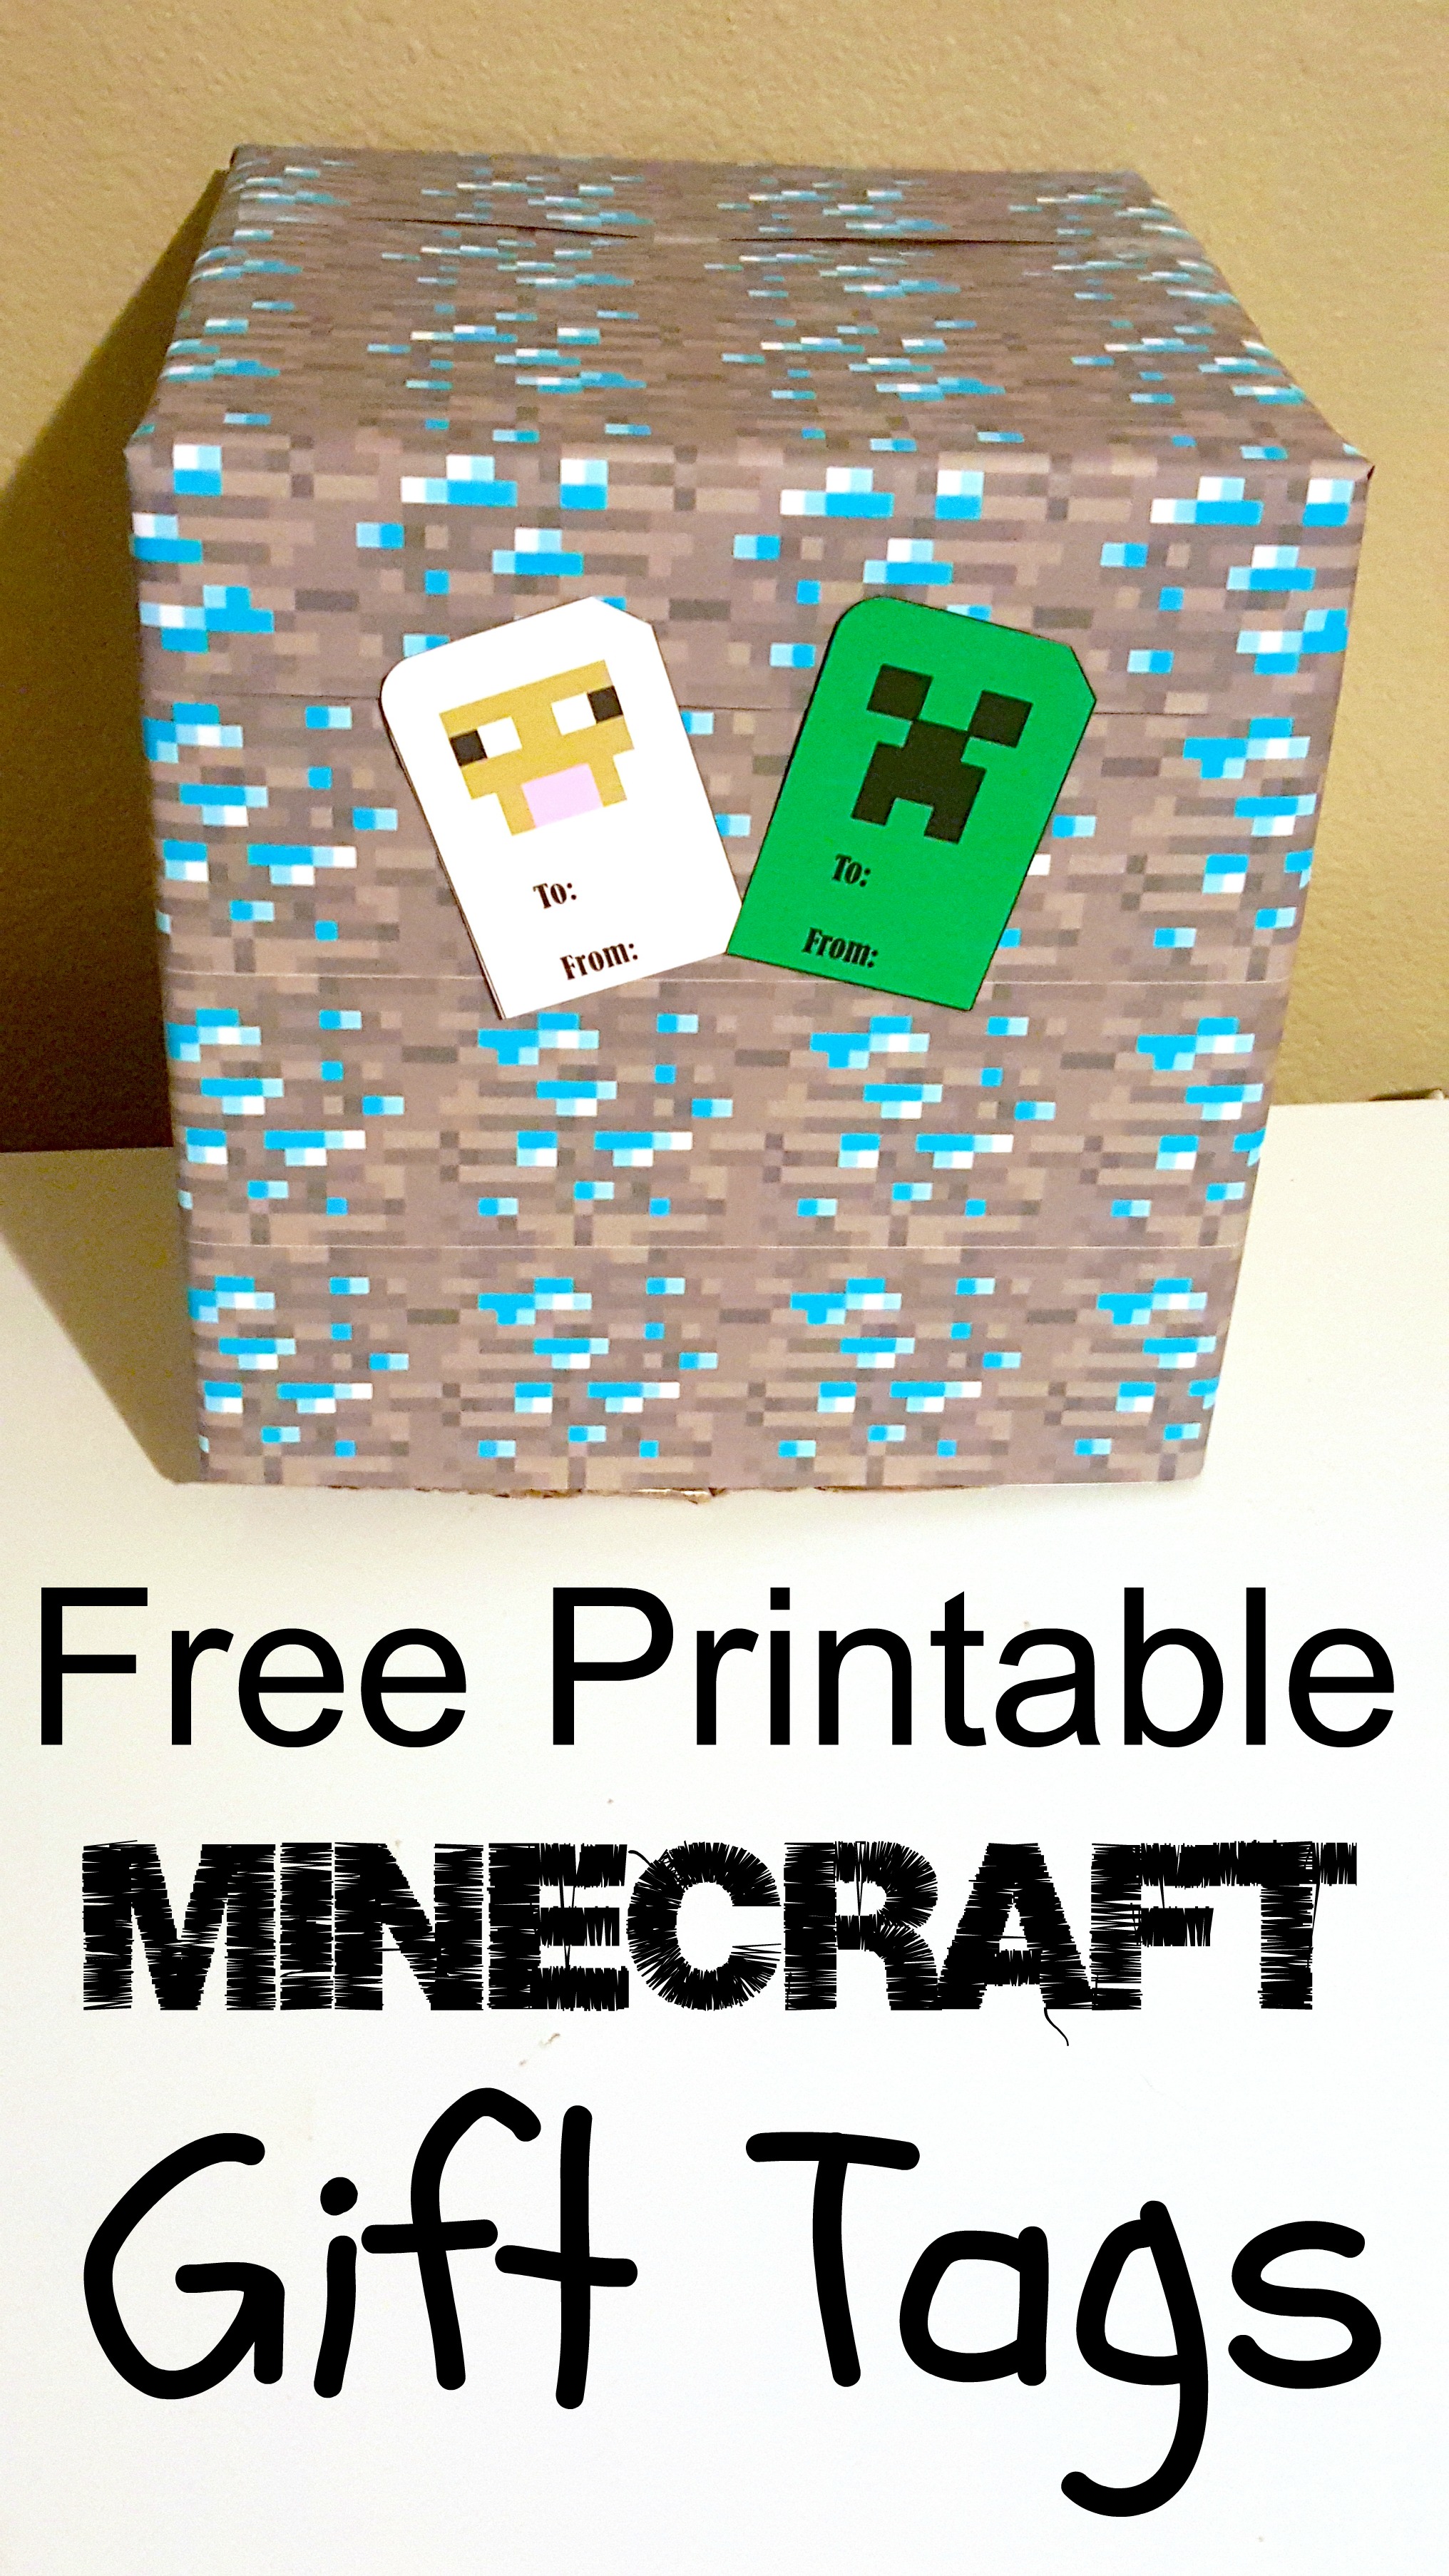 FREE Printable Minecraft Gift Tags